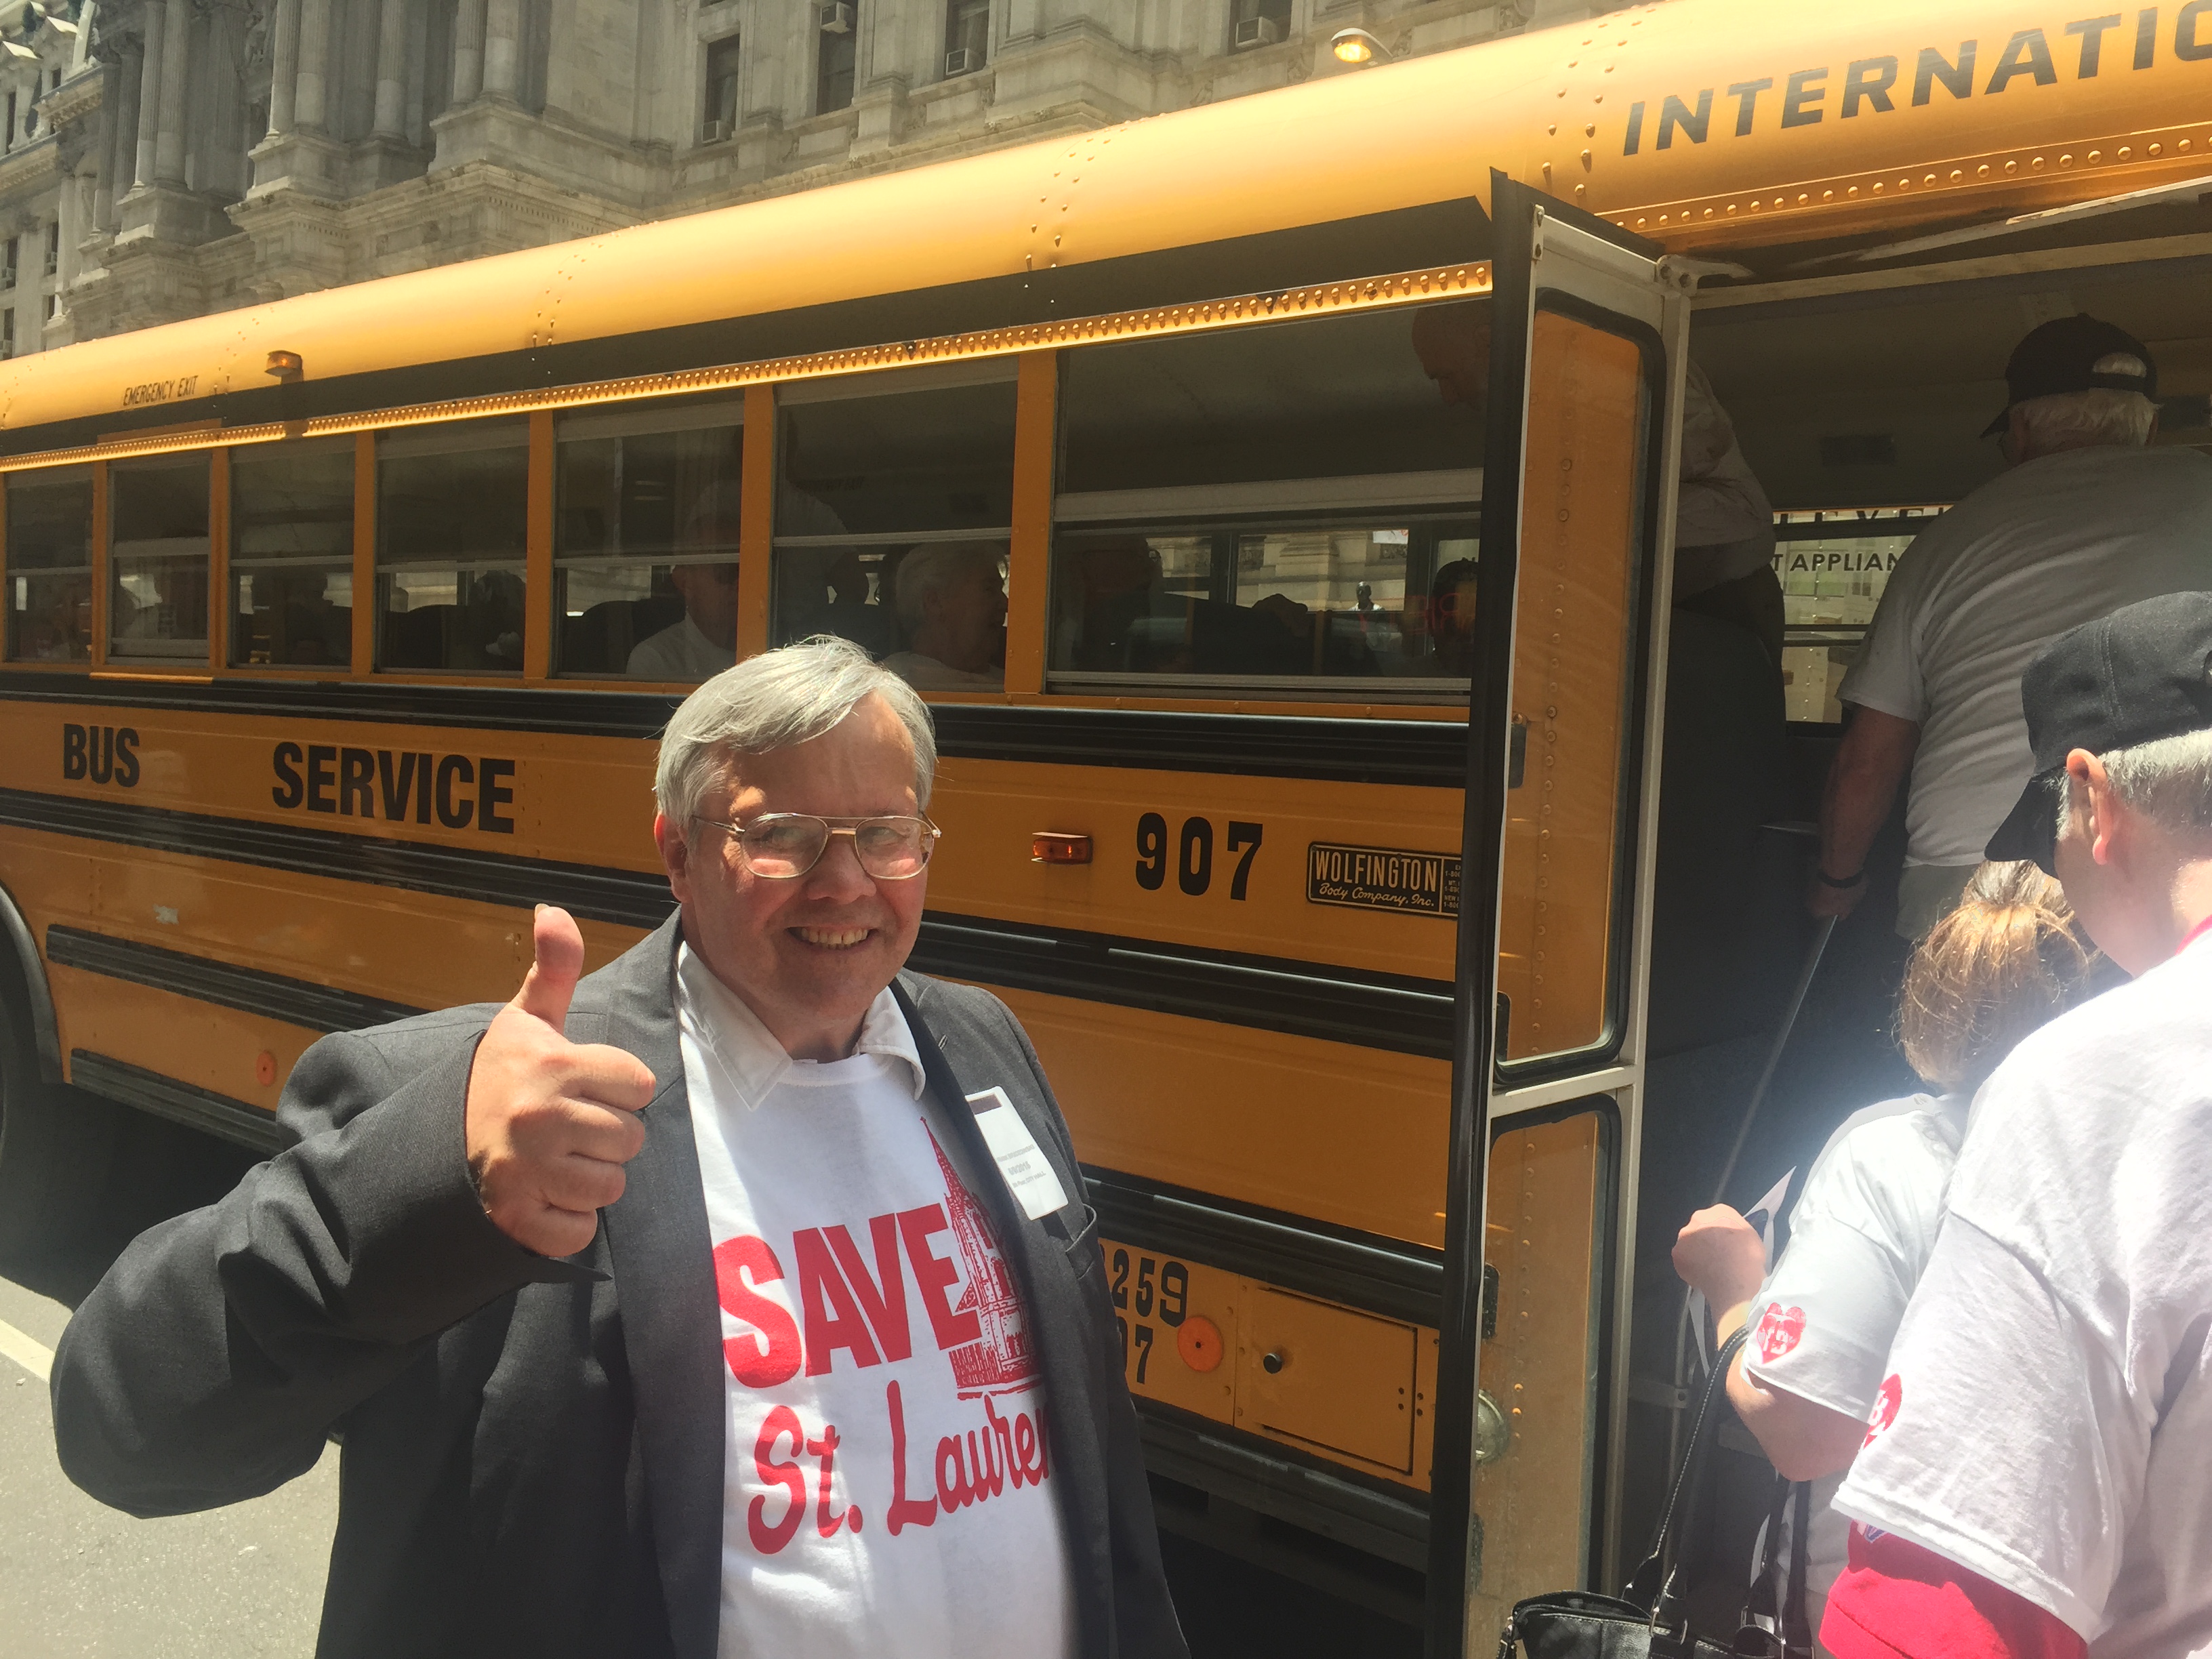 Frank Brzozowski, former St.Laurentius parishioner, joining about 30 other supporters who bussed from Fishtown for the hearing. | Bobby Allyn/WHYY NewsWorks